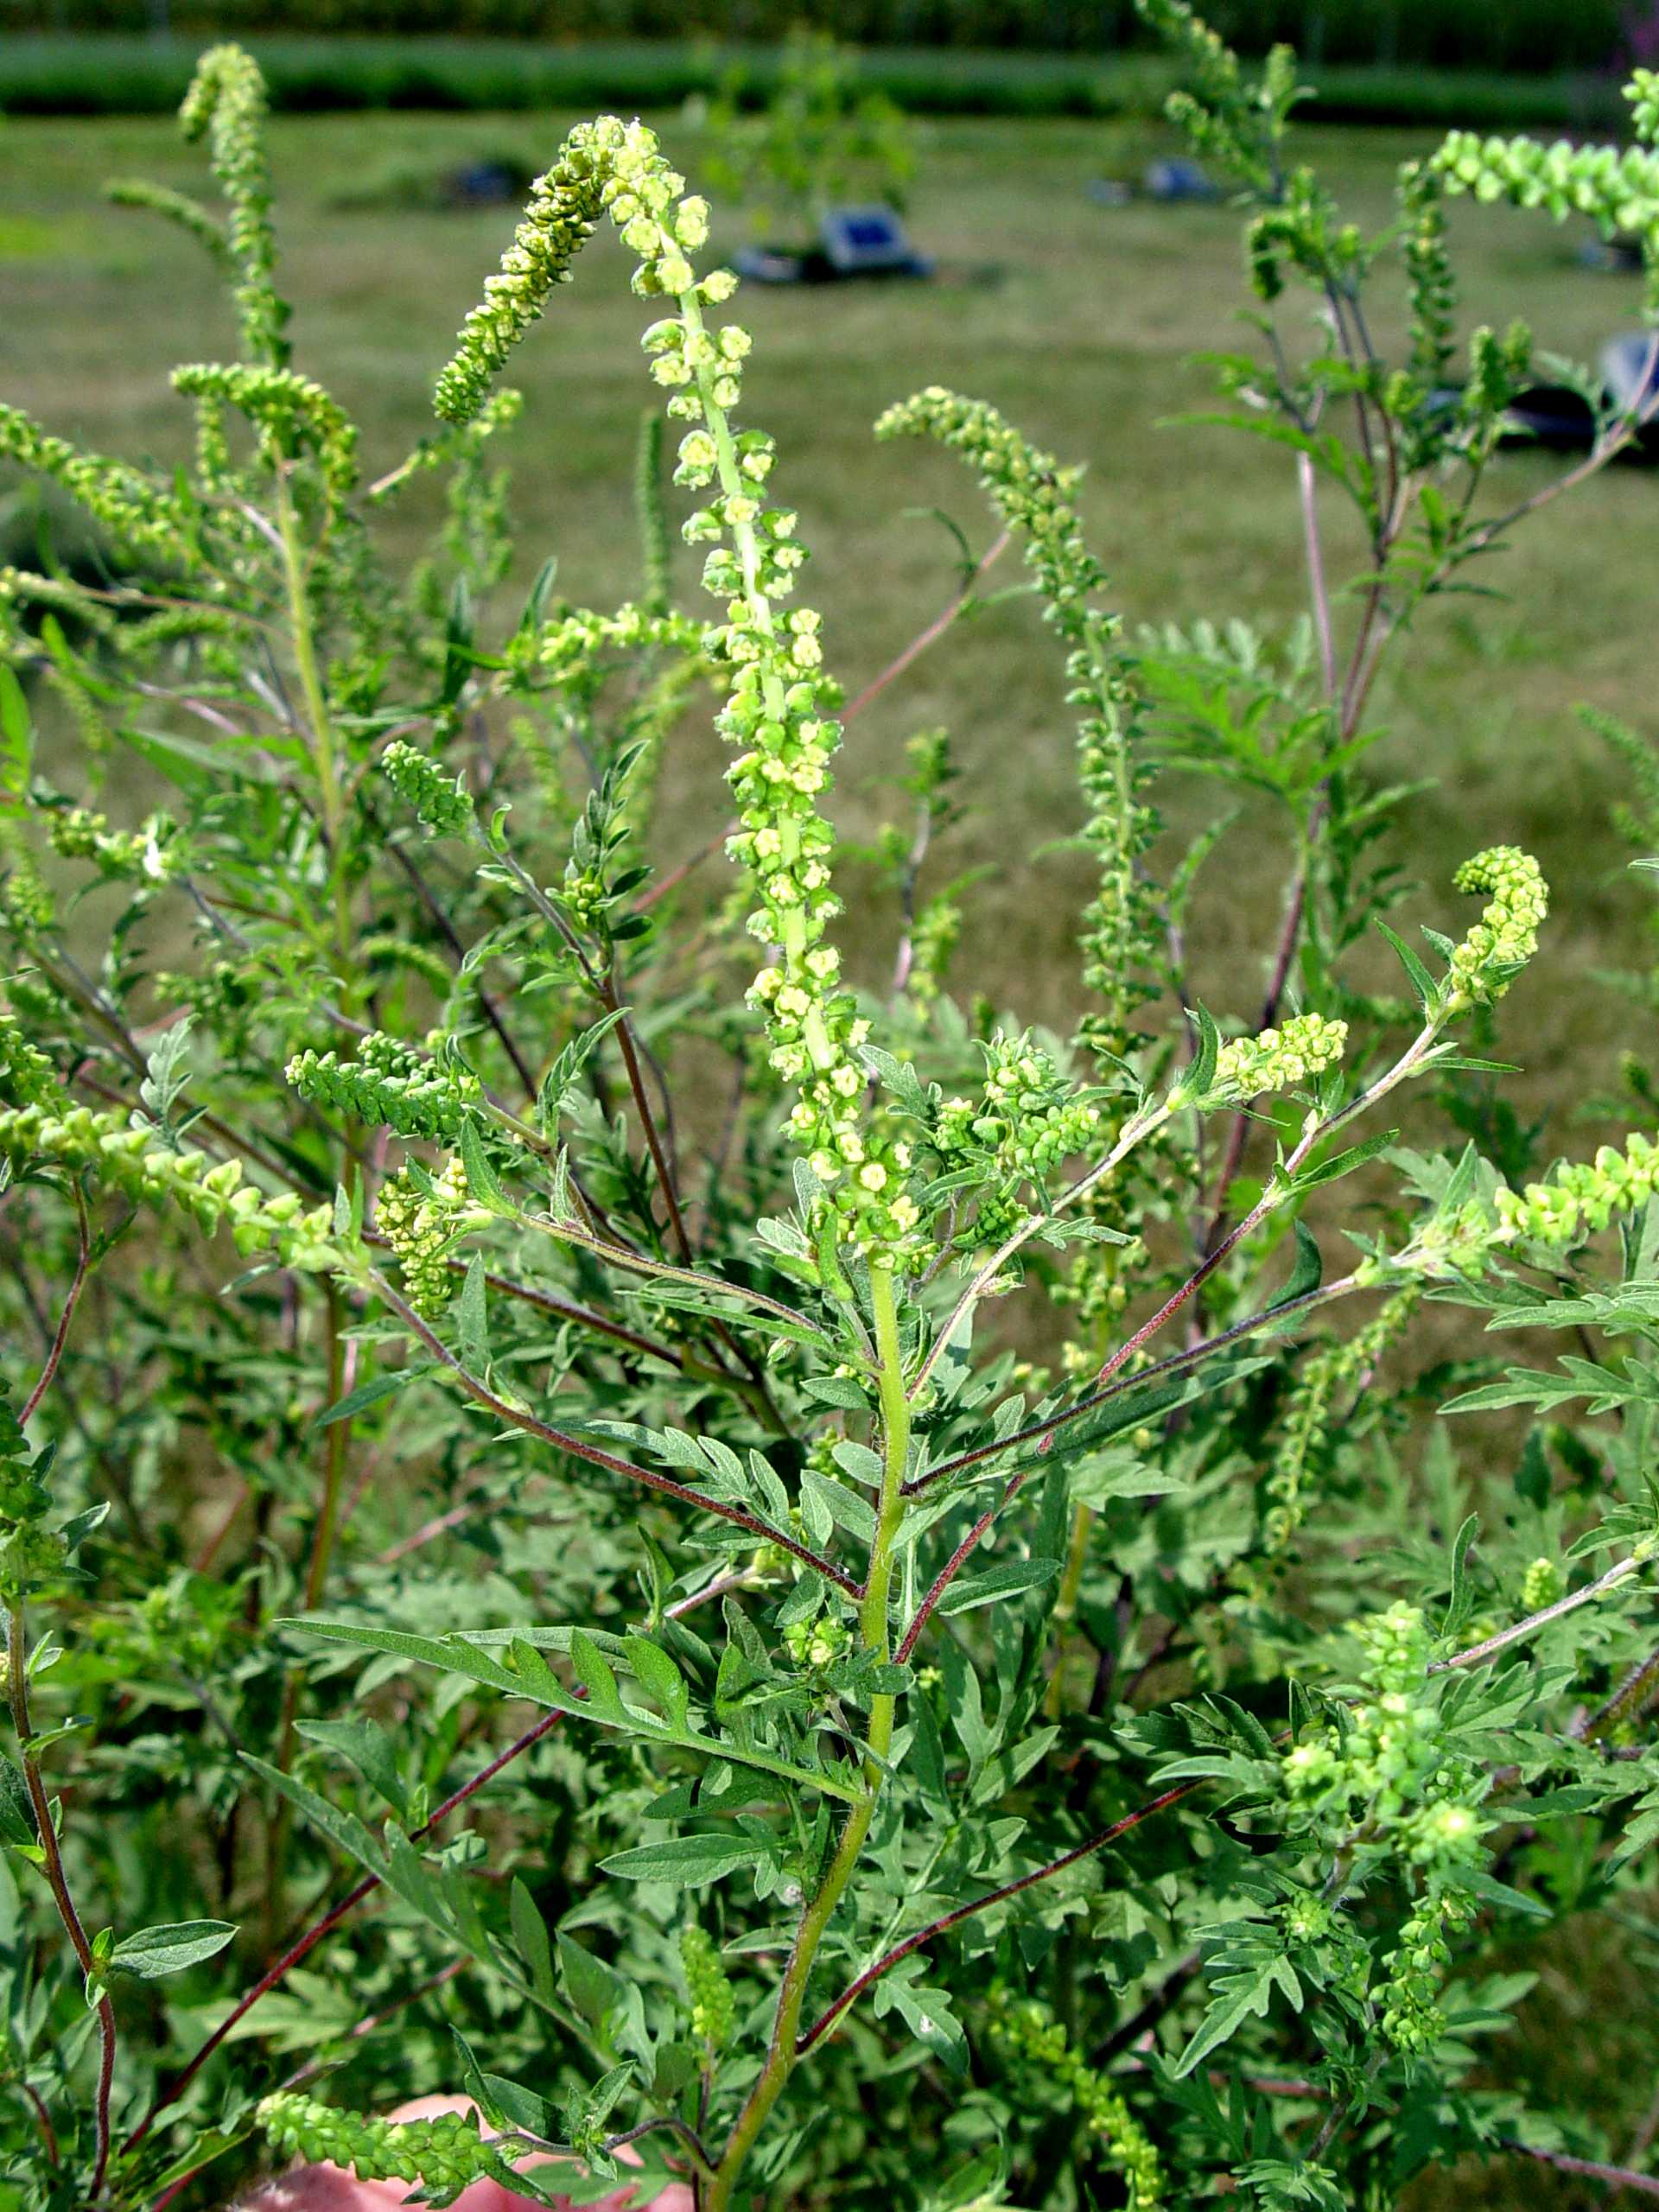 The flower spikes of ragweed are a not-so-showy yellow-green.